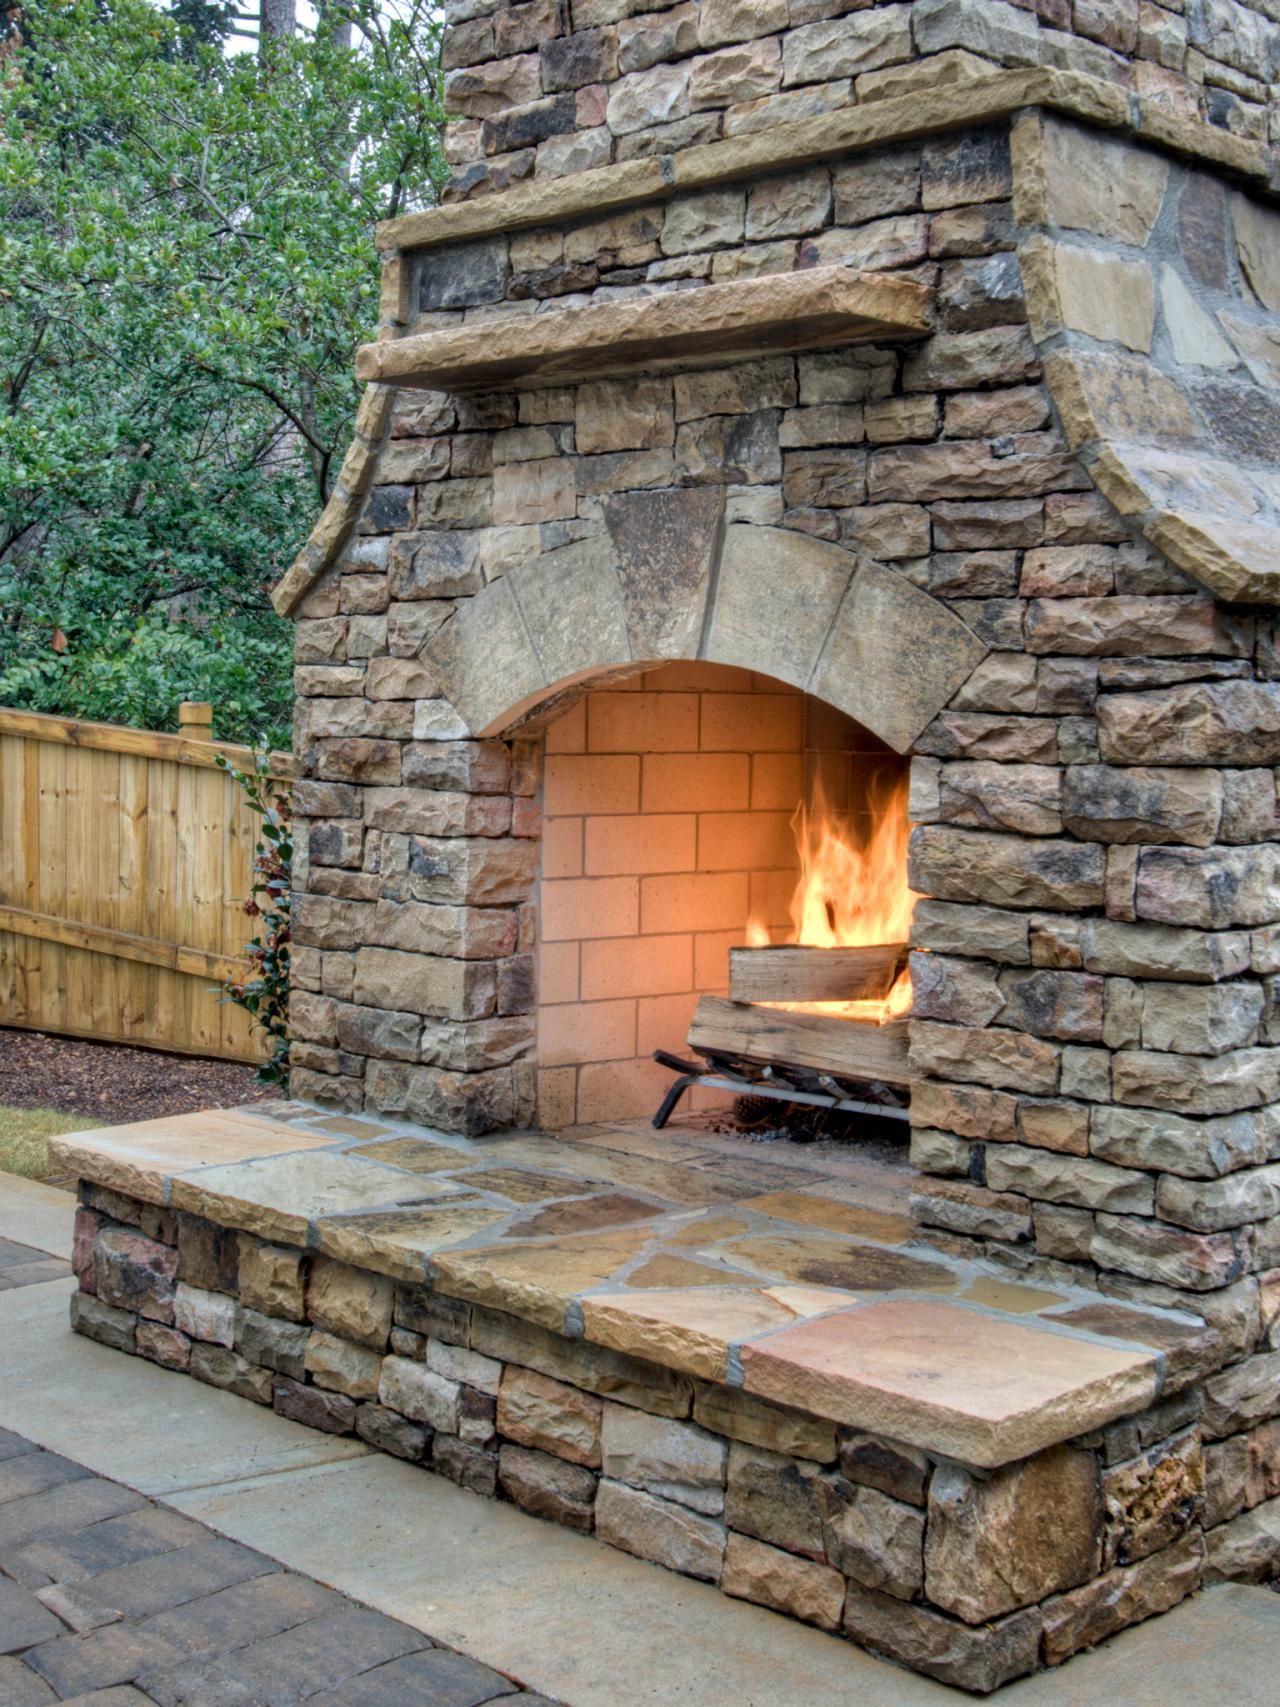 Design Ideas for Outdoor Fireplaces ... -   Outdoor Fireplace Ideas